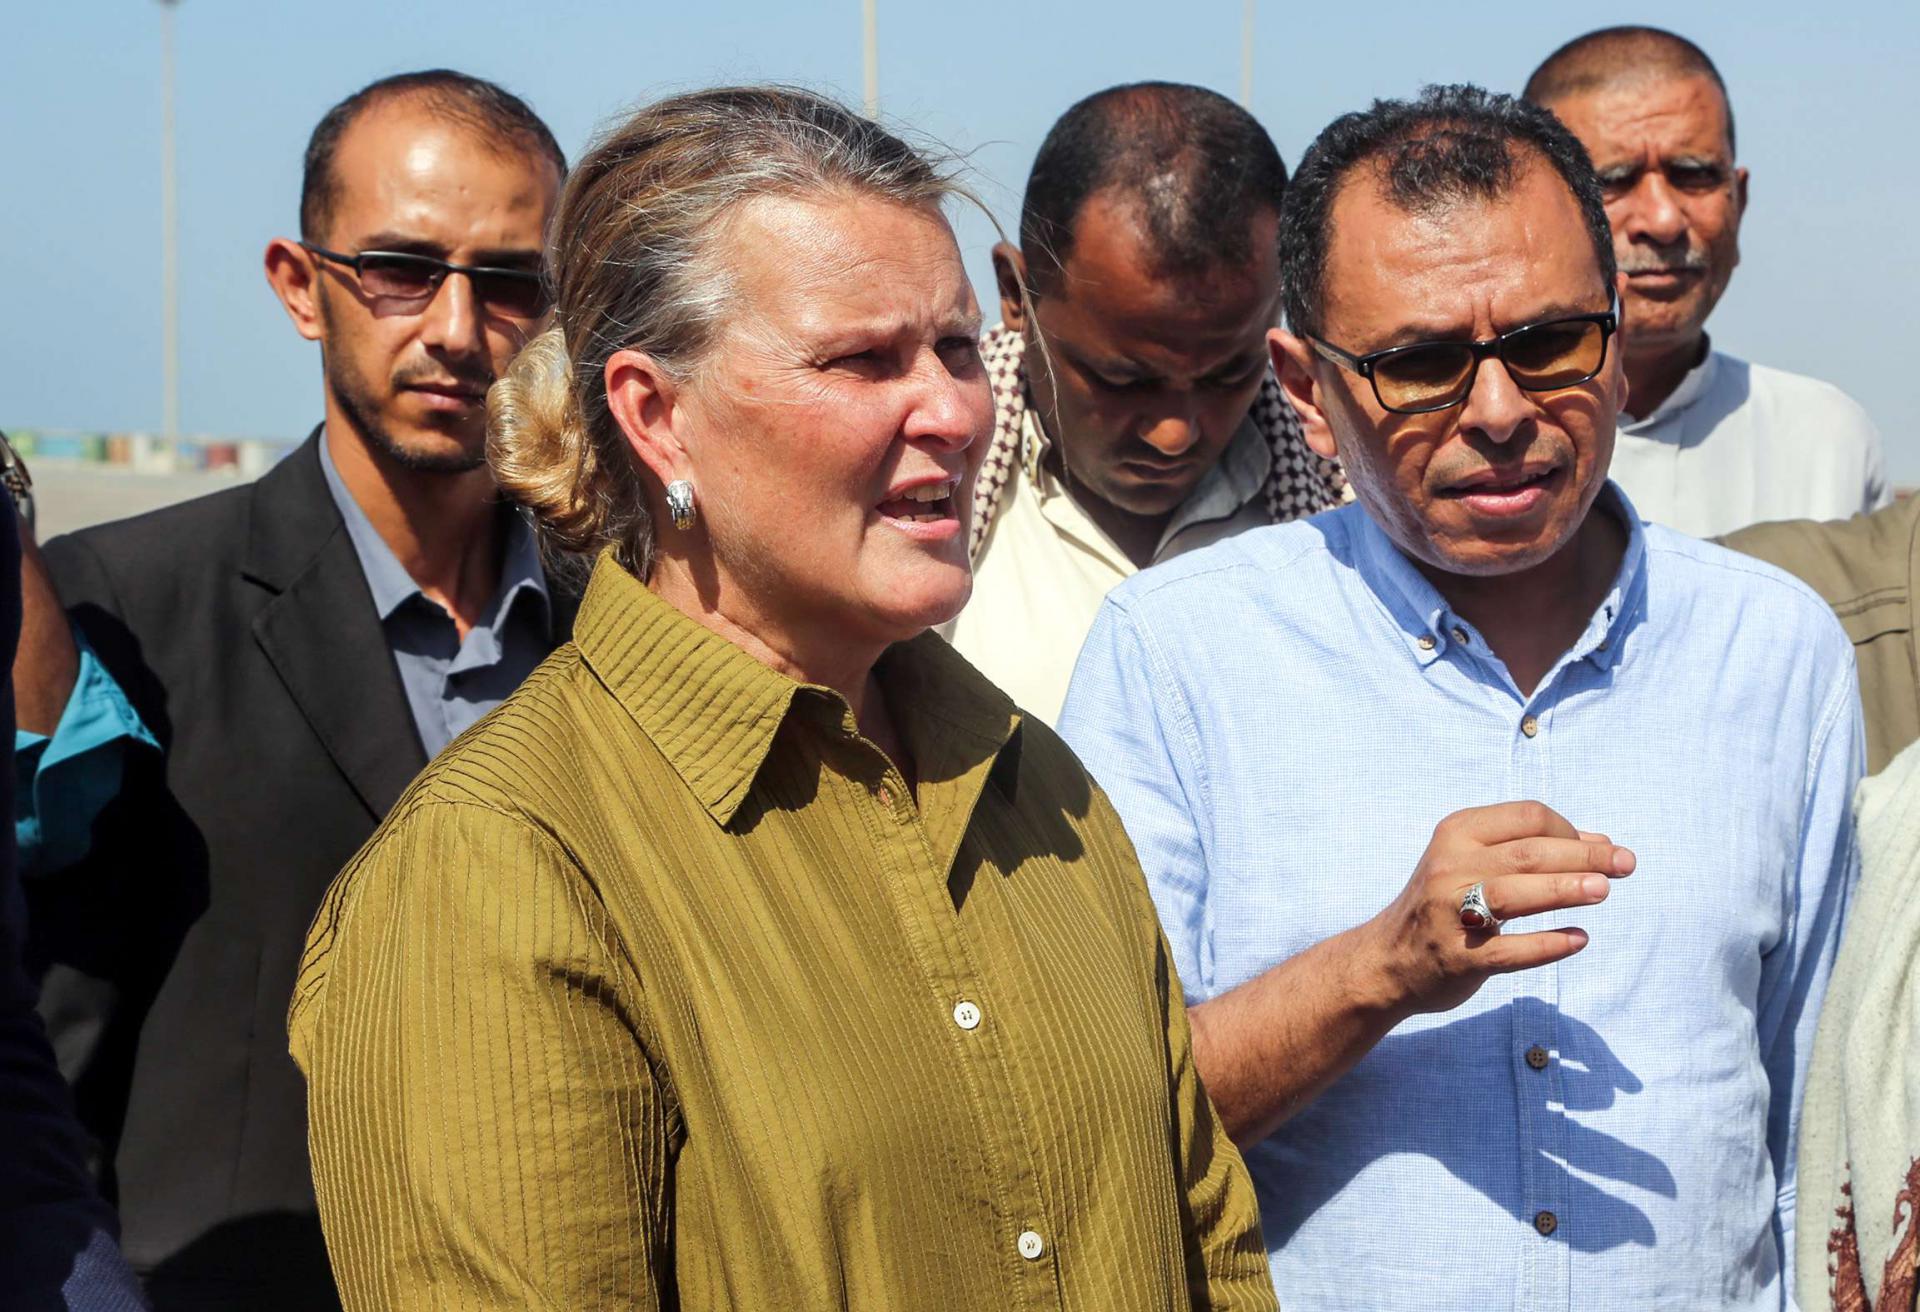 UN Resident Coordinator in Yemen, meets with officials during her visit to the embattled Red Sea port city of Hodeida on January 11, 2019